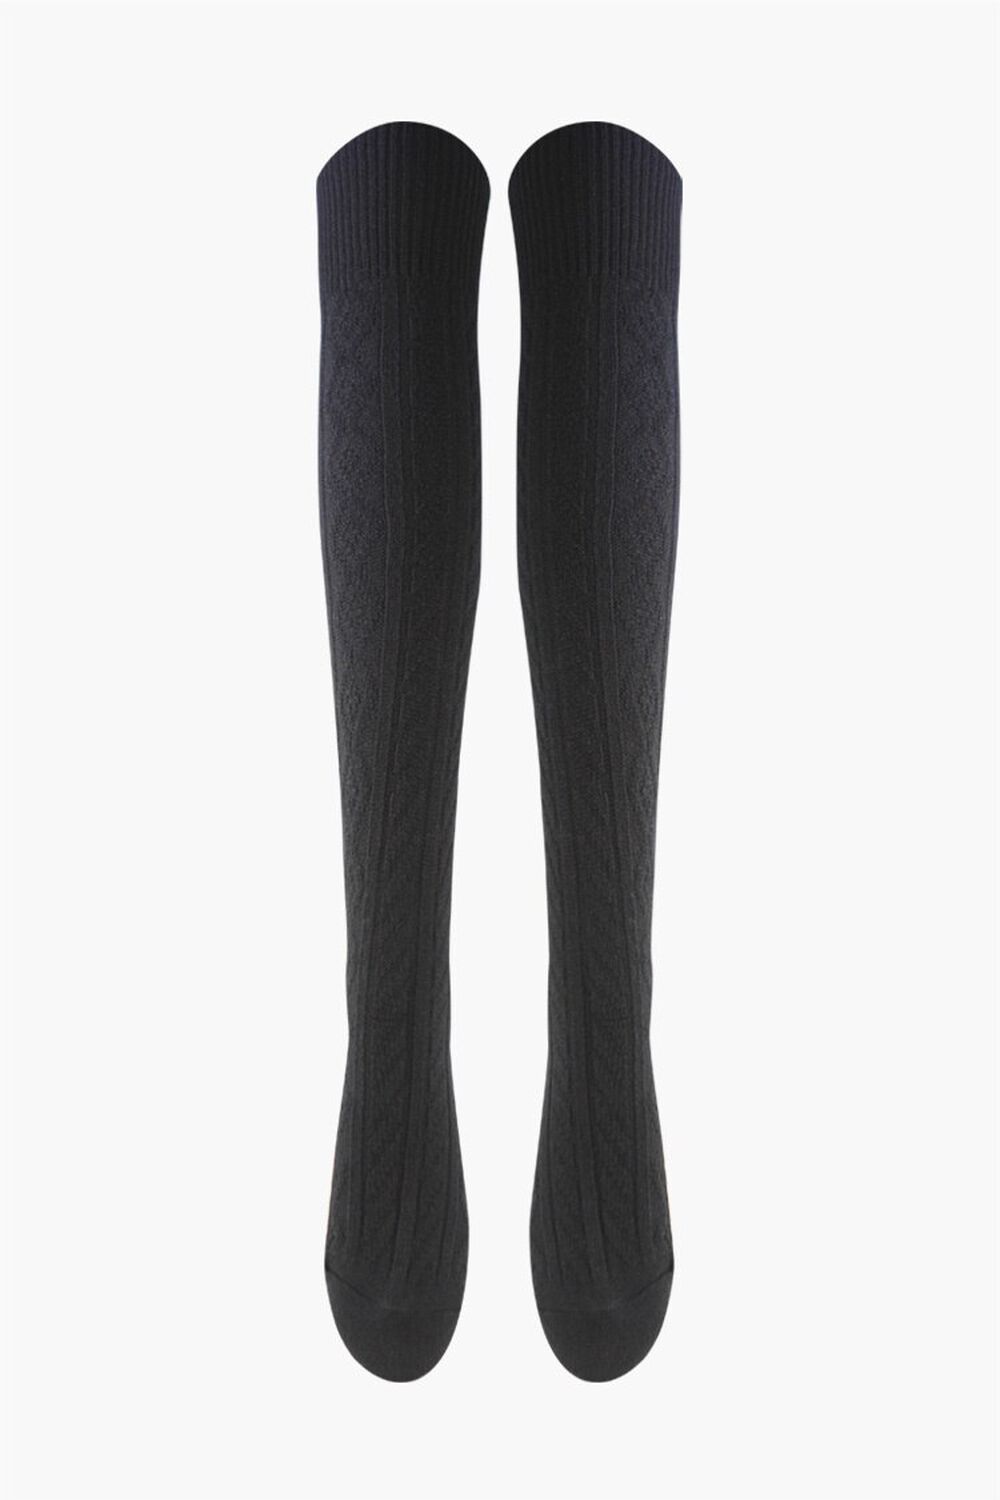 Over-the-Knee Cable-Knit Socks, image 1